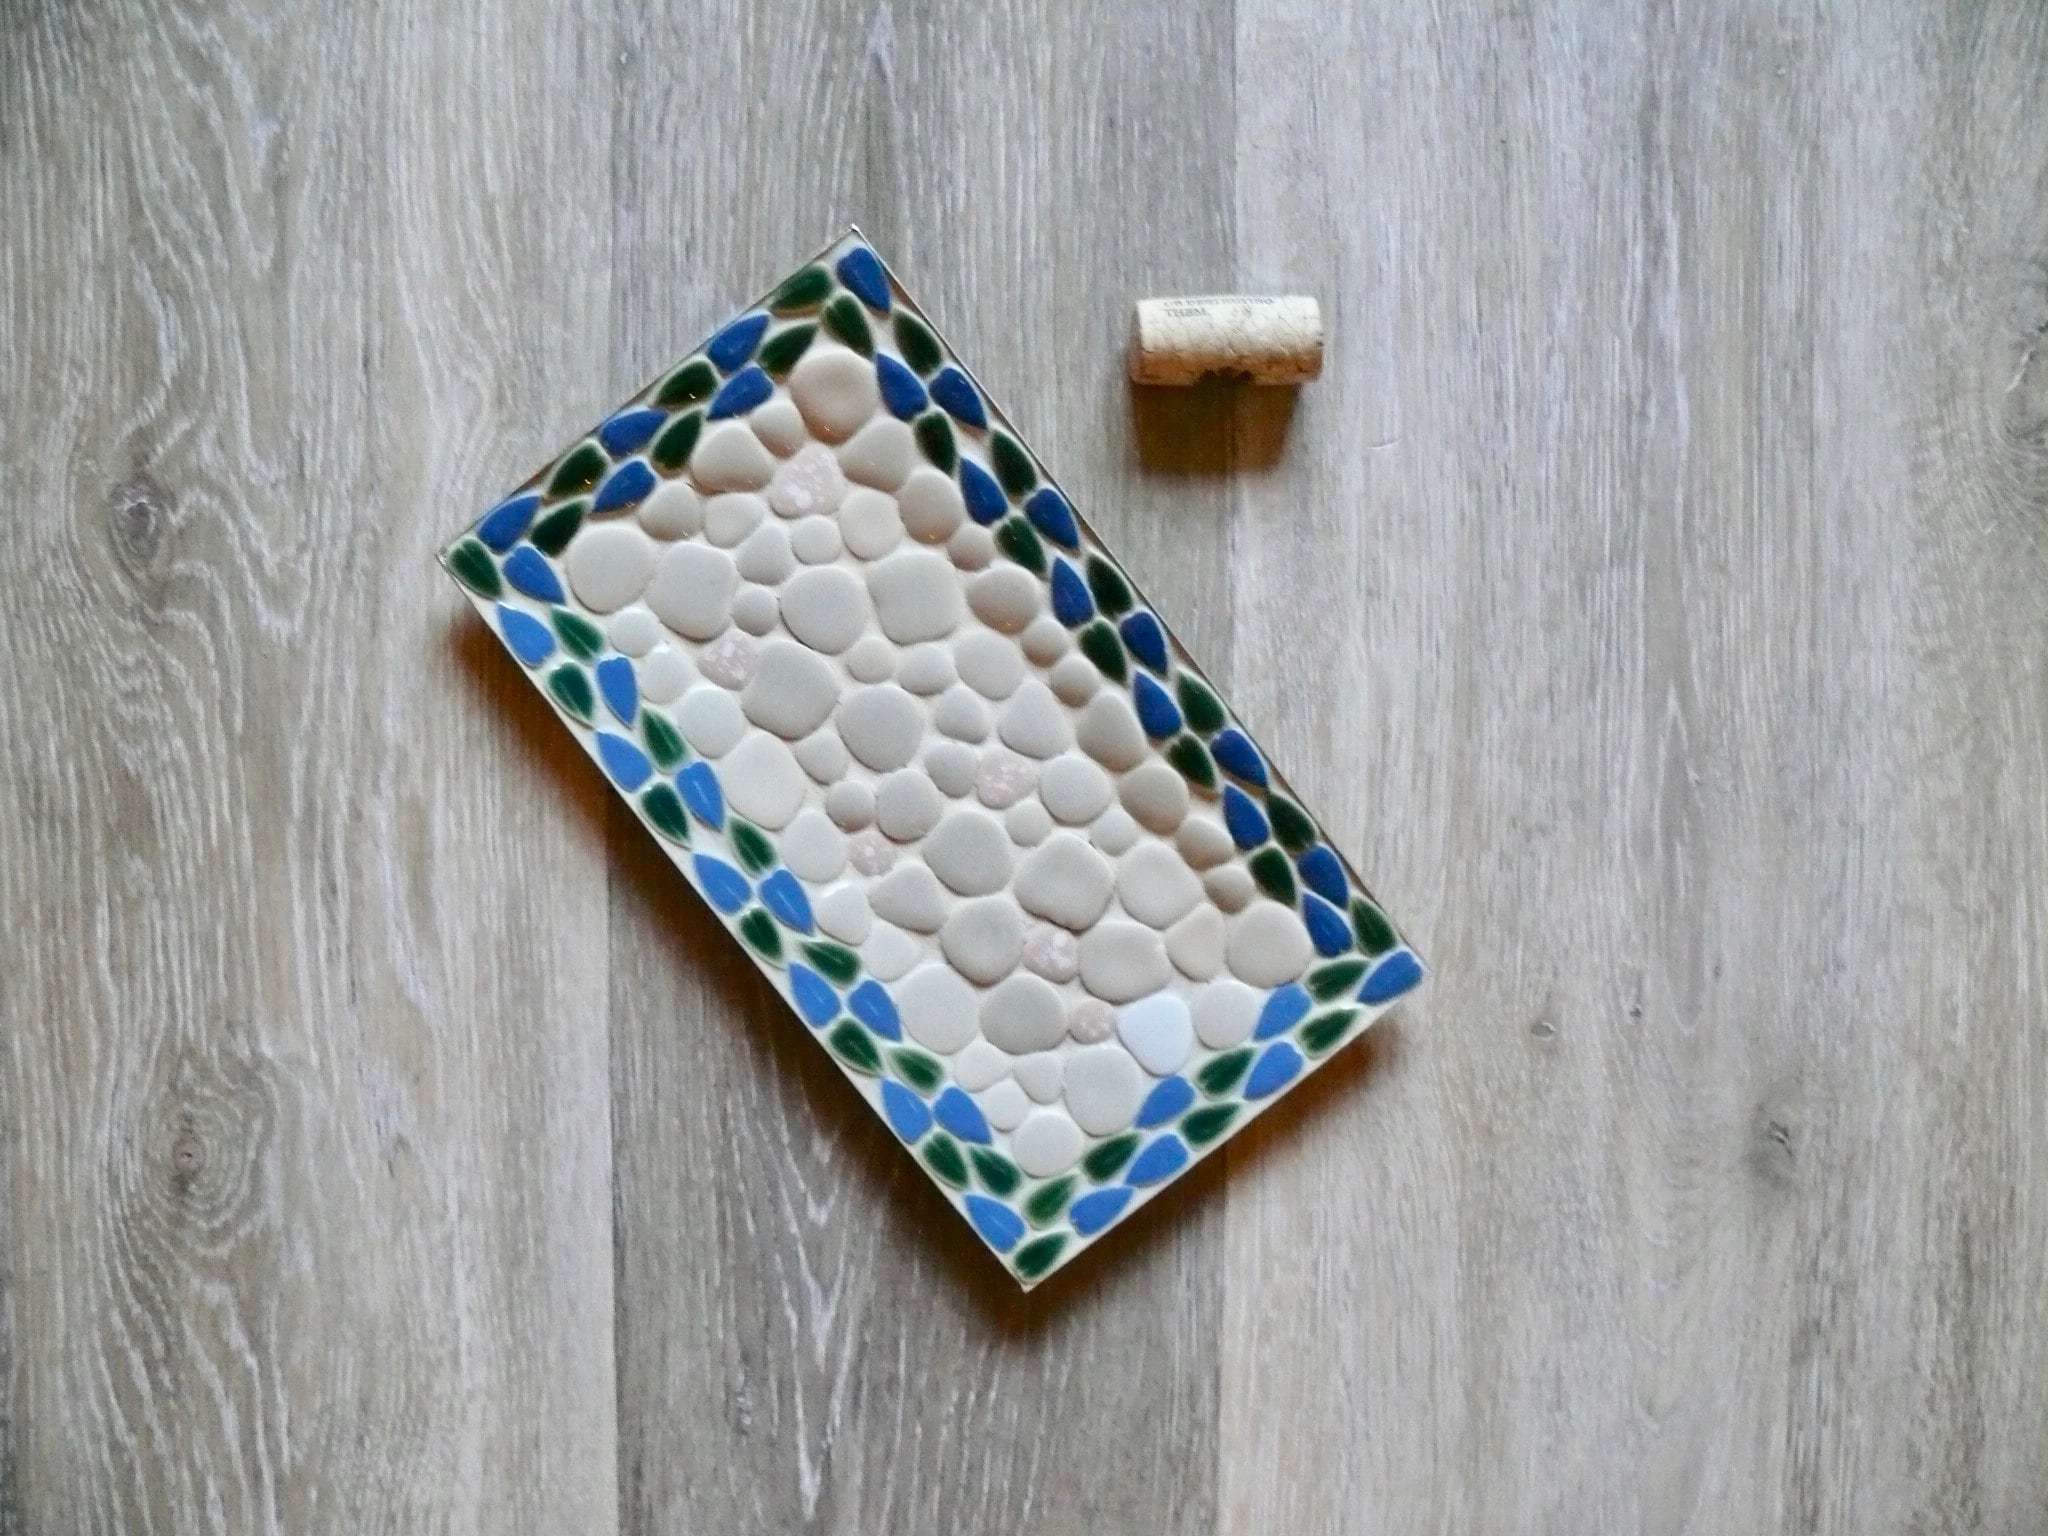 DIY Mosaic Tiles Kit for Crafts for Adults Beginners, Make Your Own  Artistic Glass Mosaic Serving Tray, Handmade Ceramic Tile Project 